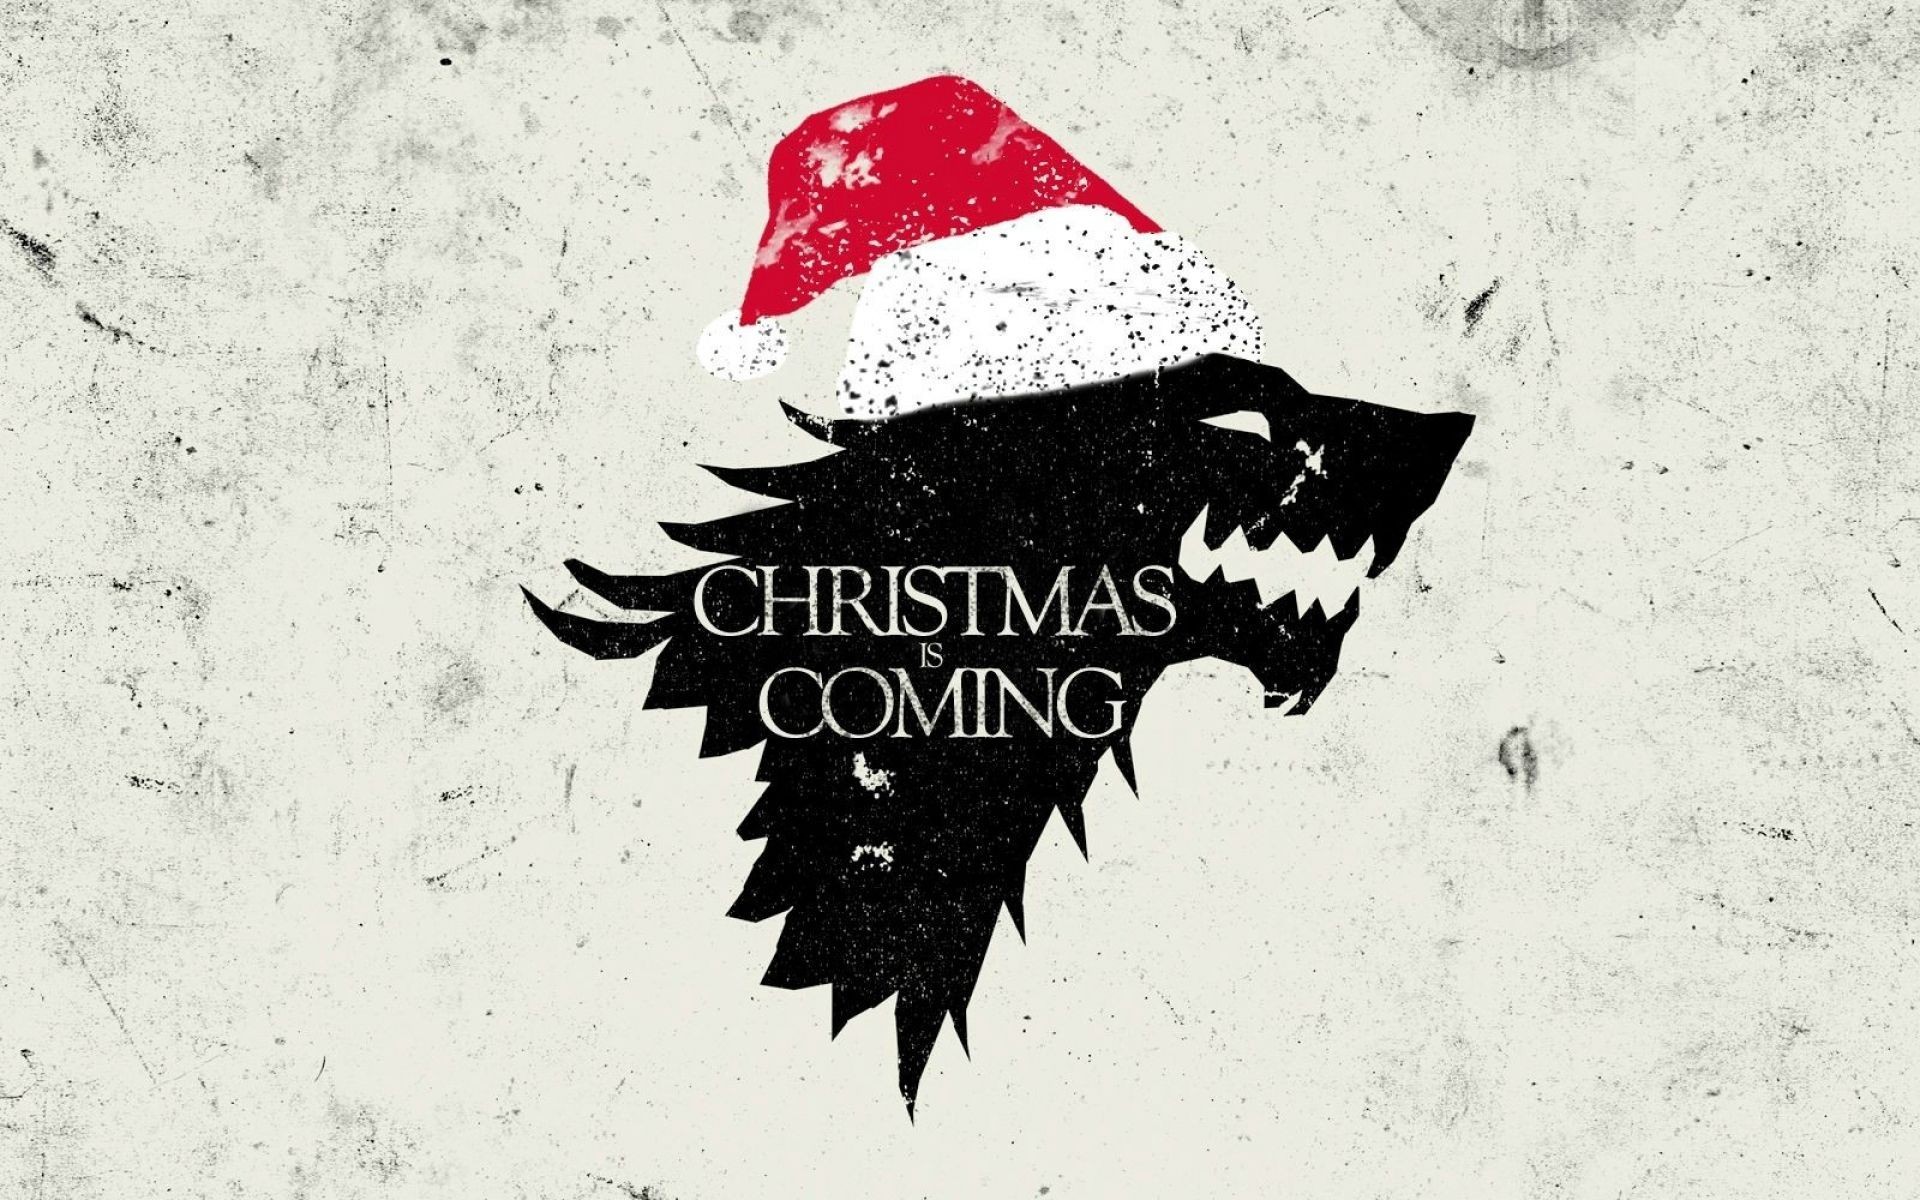 Game Of Thrones Parody Direwolf Winter Is Coming Christmas Quote 1920x1200